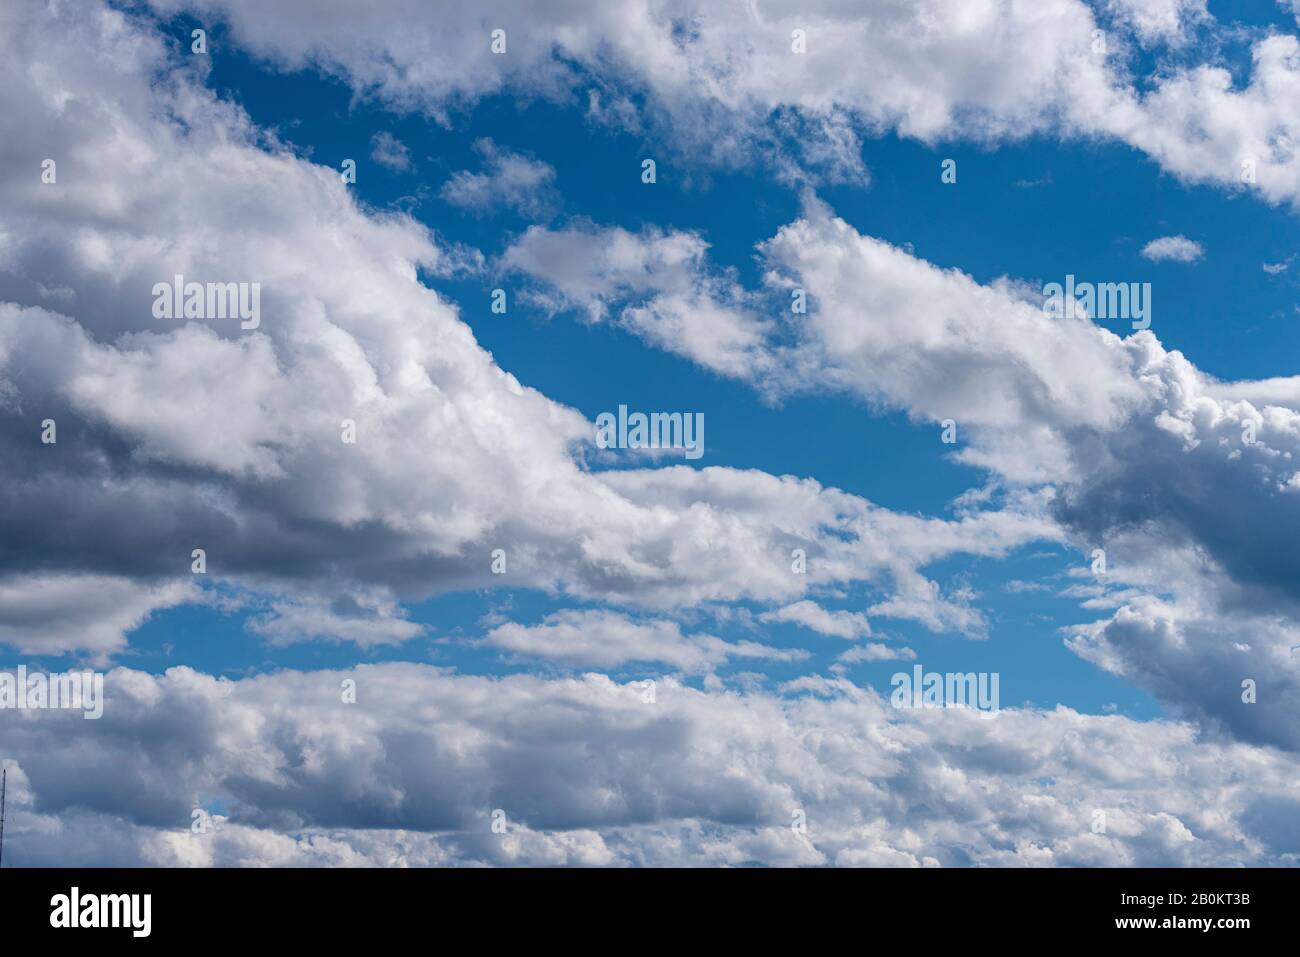 Blue sky with white fluffy clouds. Peaceful sky. Stock Photo